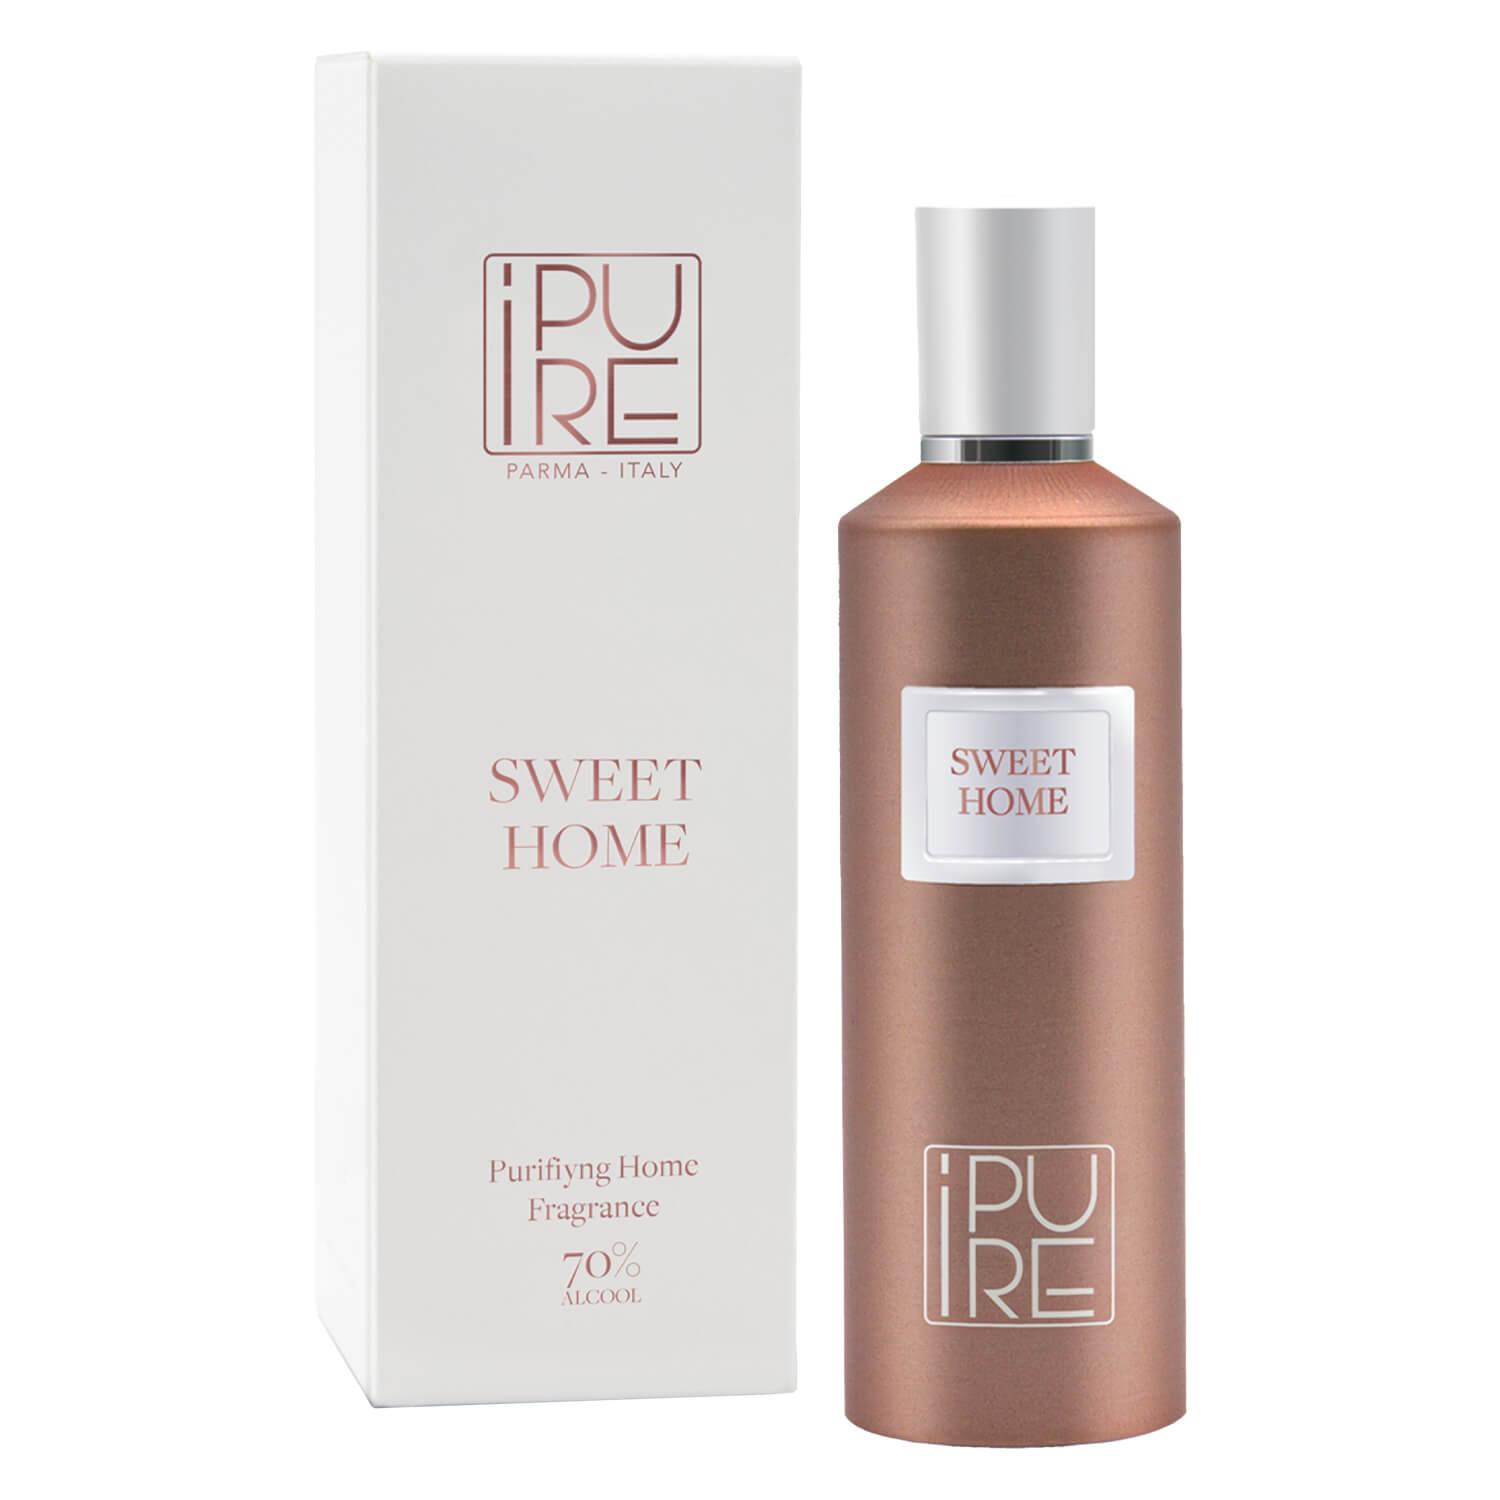 iPURE - Purifying Home Fragrance Spray SWEET HOME